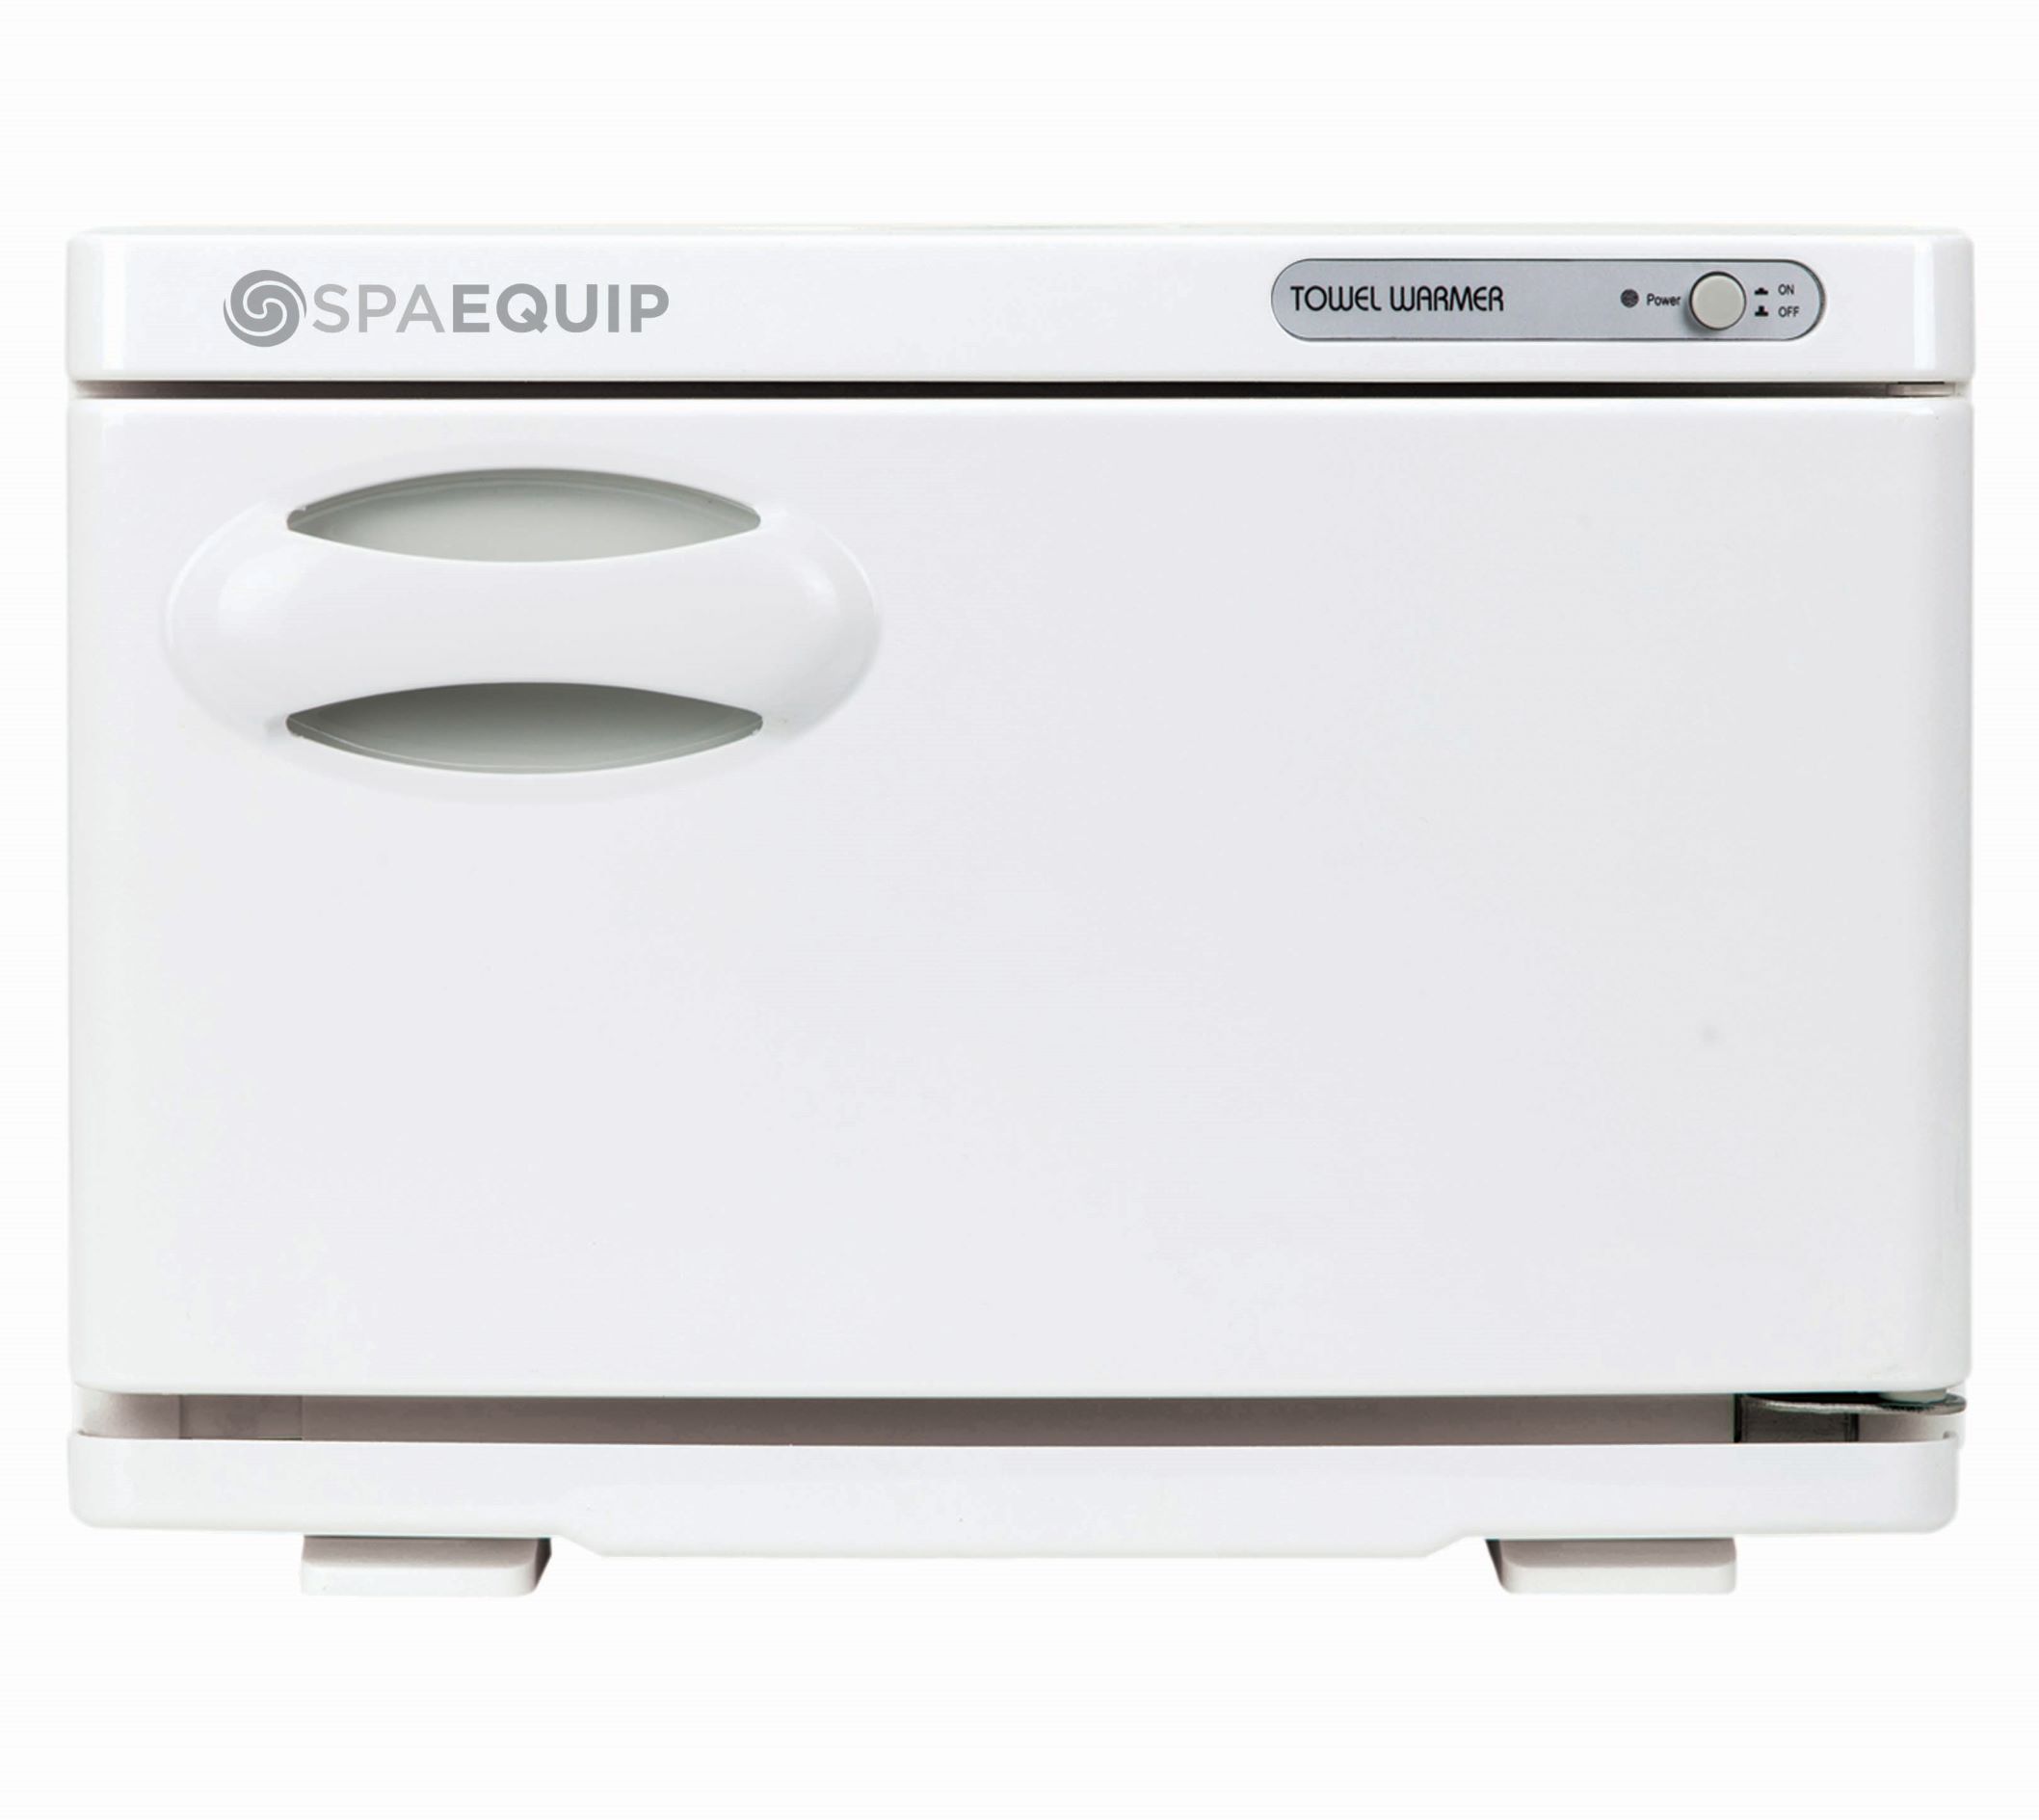 Treatment Warmers & Towel Cabi SpaEquip Towel Cabinet, Small, White